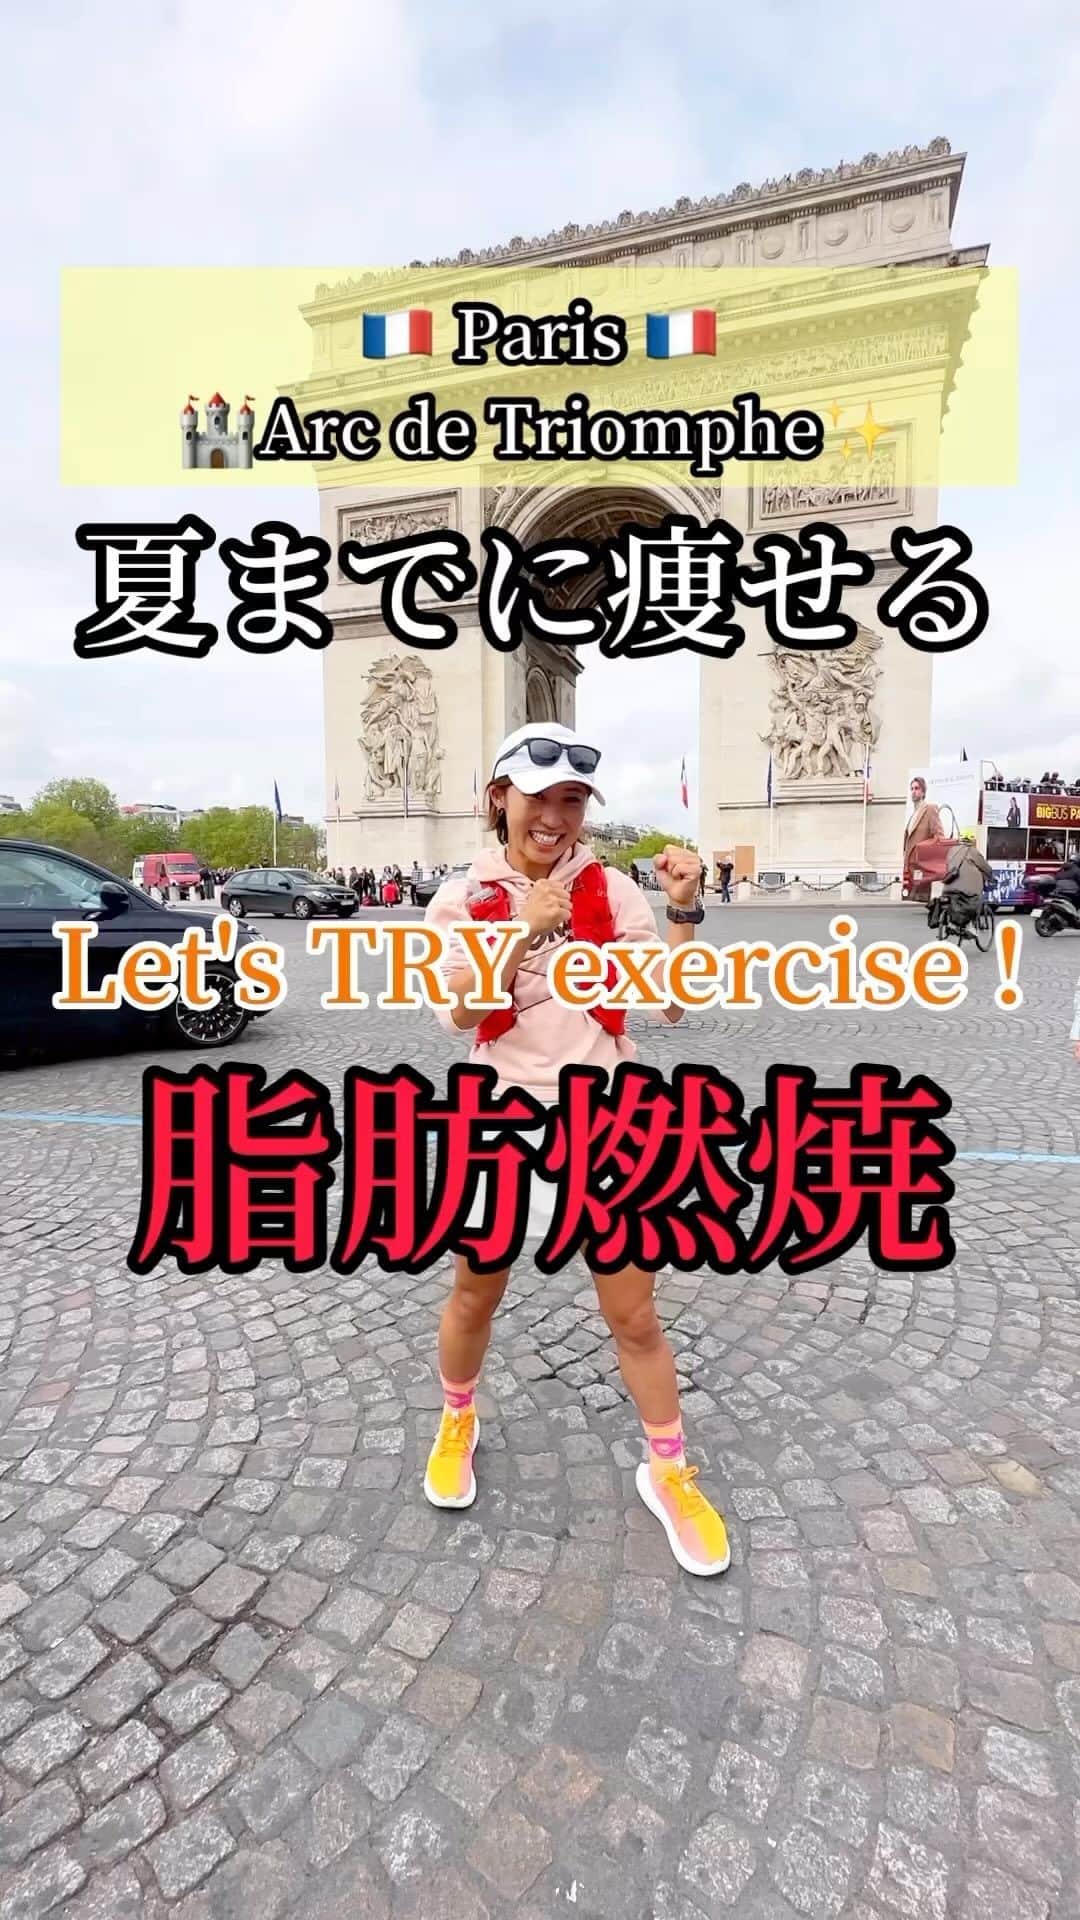 TOMOMIのインスタグラム：「🇫🇷Paris🇫🇷 Arc de Triomphe🏰✨  Let's TRY exercise 😆🔥🔥🔥  音楽に合わせて楽しく身体を動かしていきましょう❤️ 夏までに目指せ！ #美ボディ 👙✨  Let's try‼︎ Healthy body makeing👙✨  渋谷駅 徒歩5分 会員制パーソナルジム CYBERJAPAN®︎GYM 🉐半額モニター募集中❤️ @cyberjapangym   #France #Paris #arcdetriomphe  #world #worldheritagesite #trip #castle  #workout #training #running #trailrunning #marathon #diet #body  #渋谷 #パーソナルジム #CYBERJAPAN GYM 🉐半額 #モニター募集  #ボディメイク #ダイエット #脂肪燃焼 #筋トレ #筋トレ女子 #トレーニング」